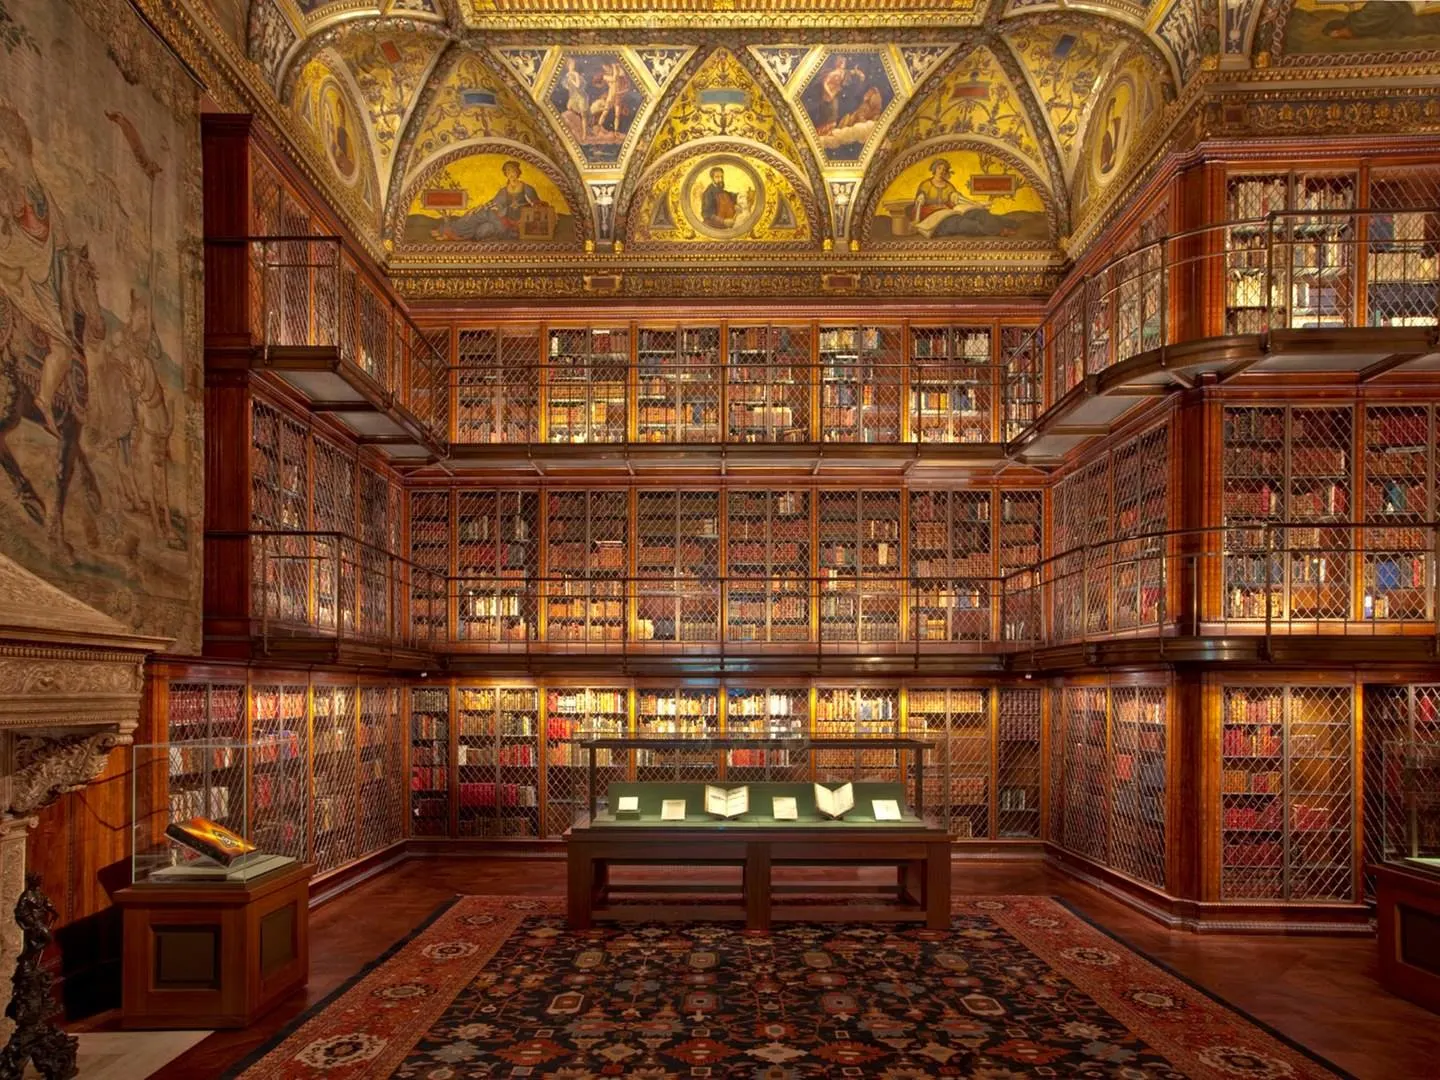 The Morgan Library & Museum, New York City